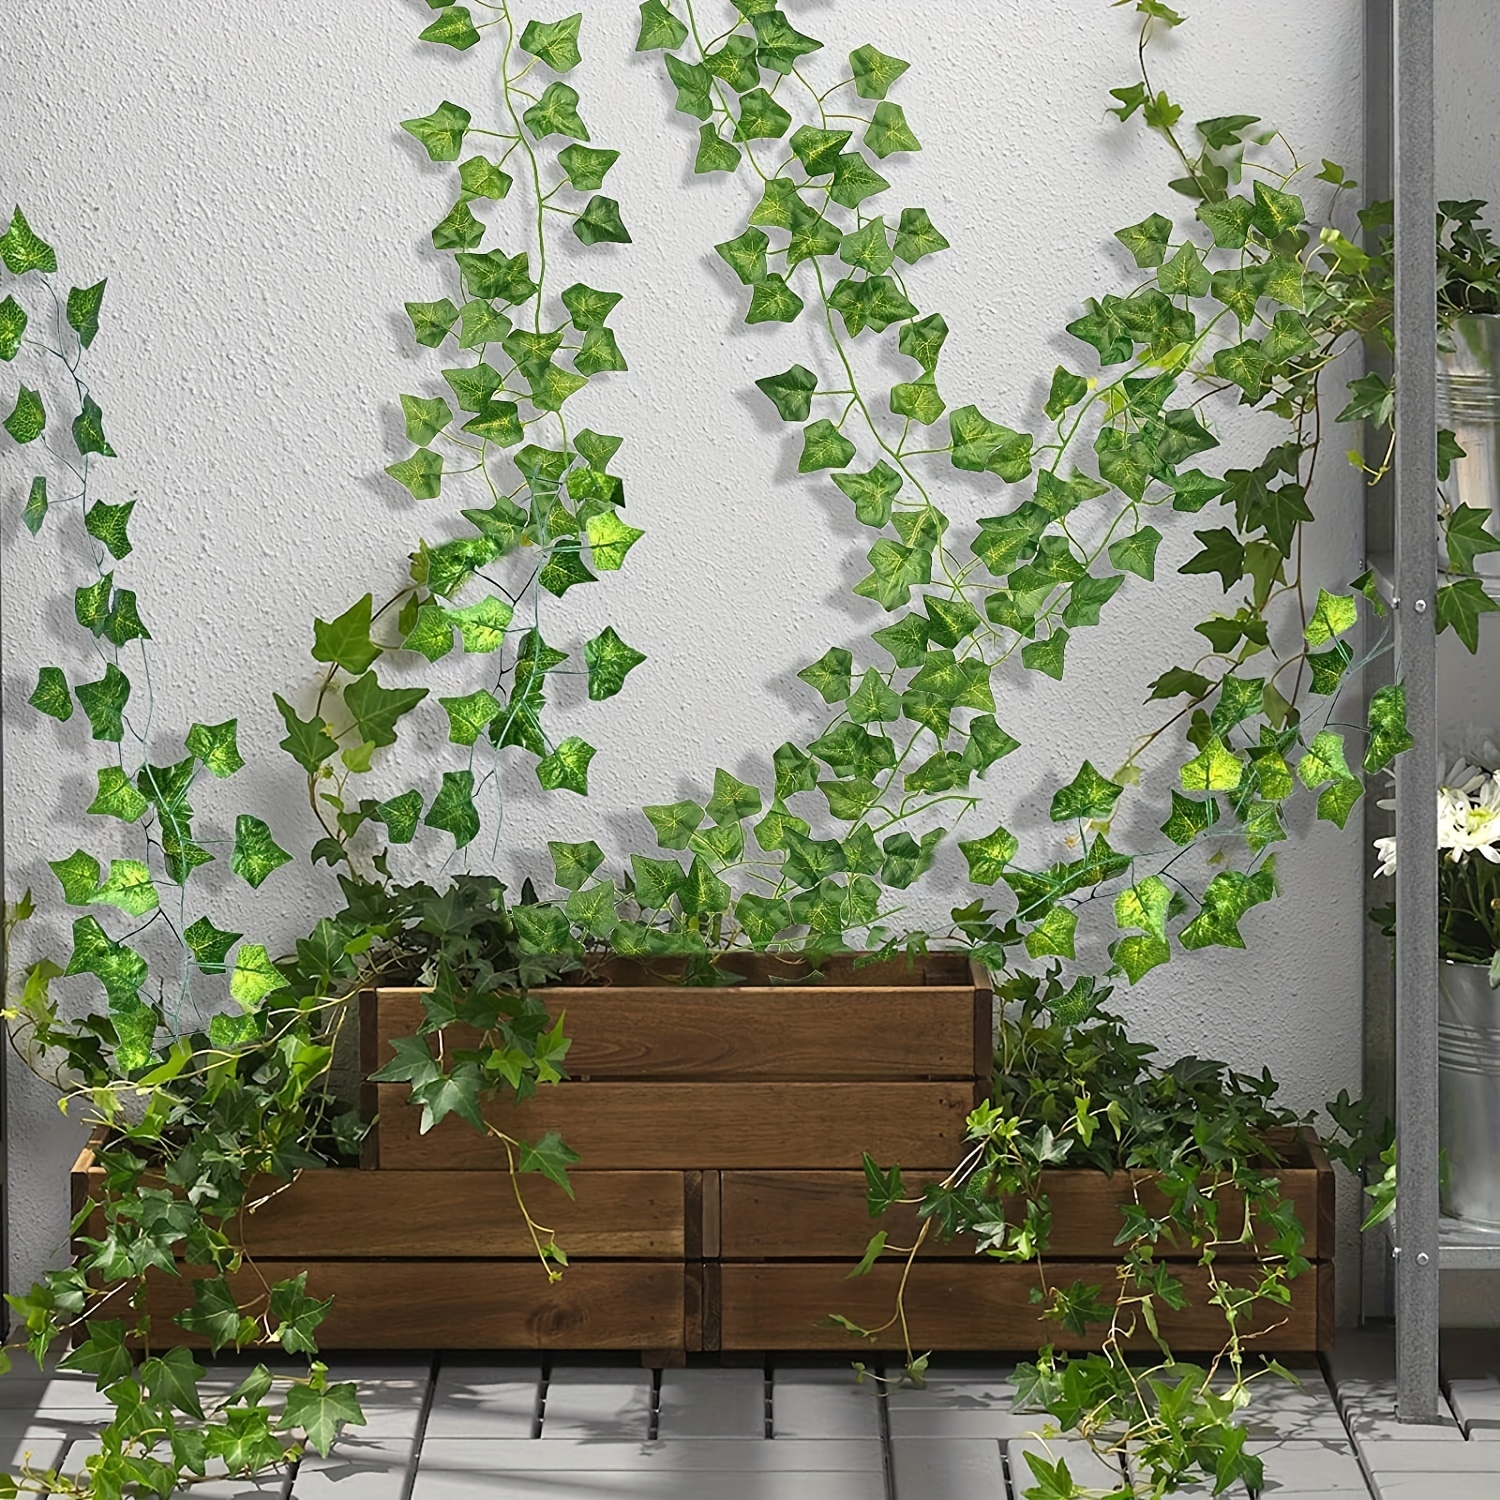 Fake Vines for Room Decoration, Ivy Leaf Wreath for Green Bedroom  Decoration, Aesthetic Hanging Vines for Wall Decoration